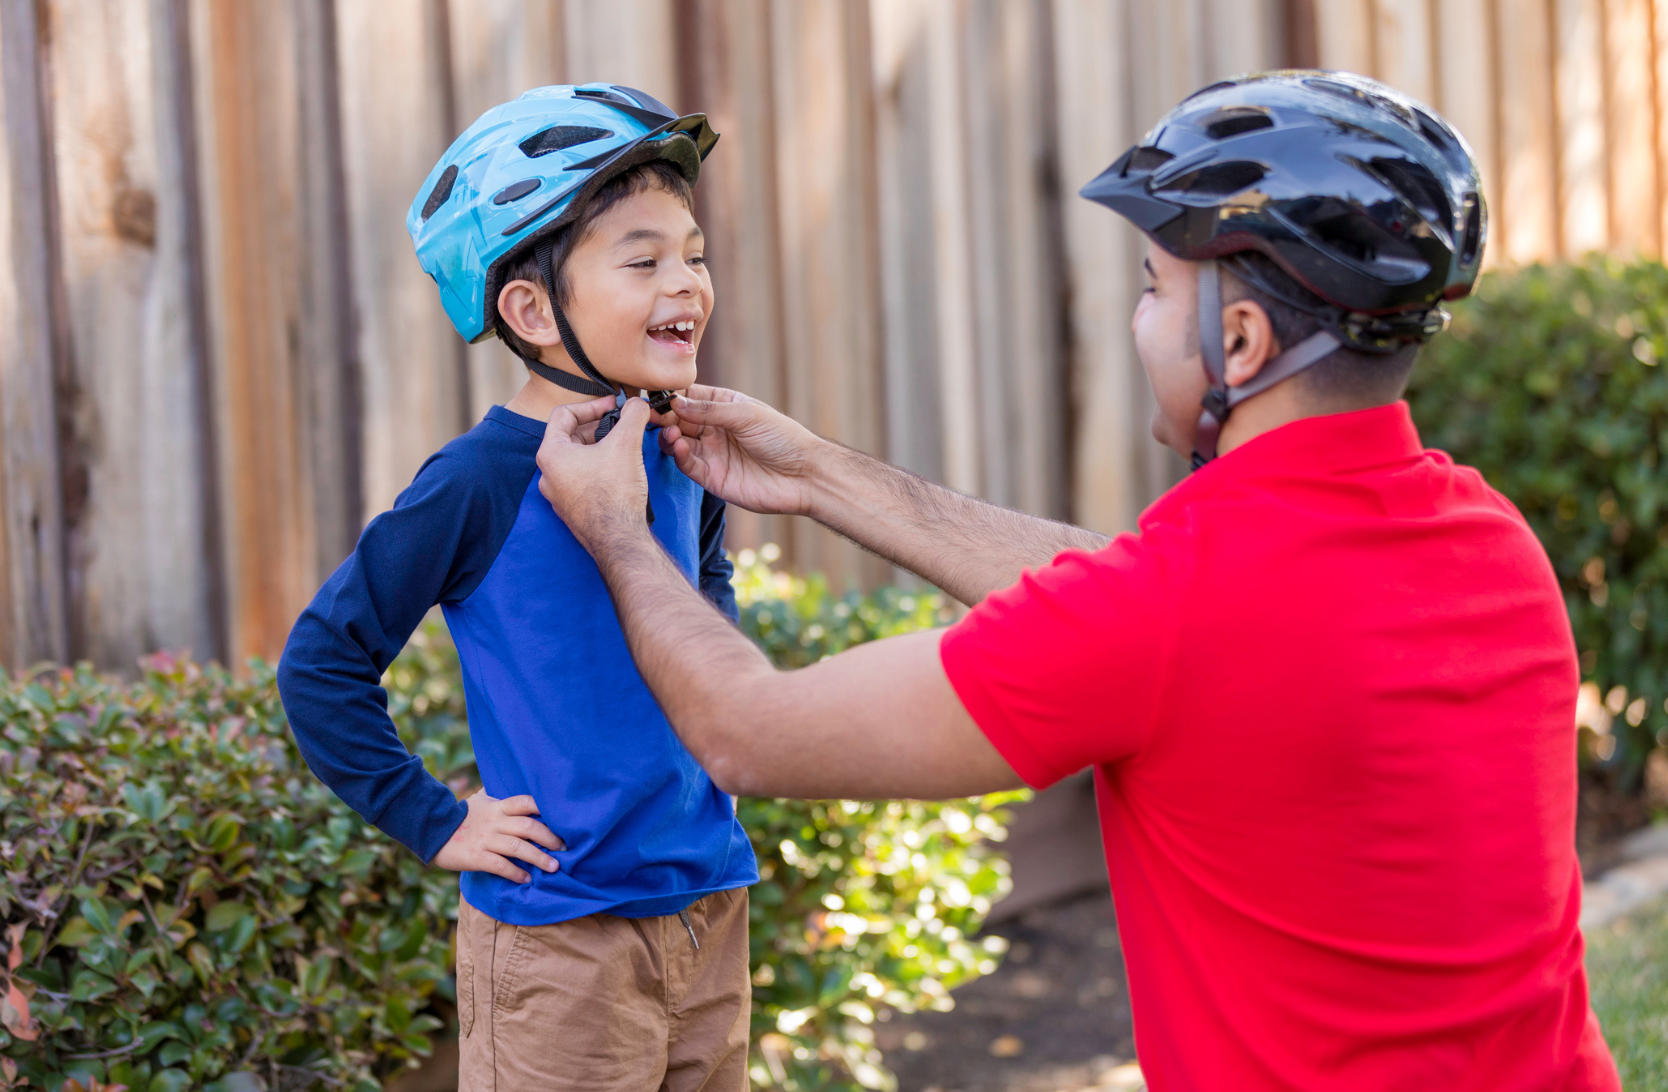 Picture of a dad buckling up his son's bike helmet